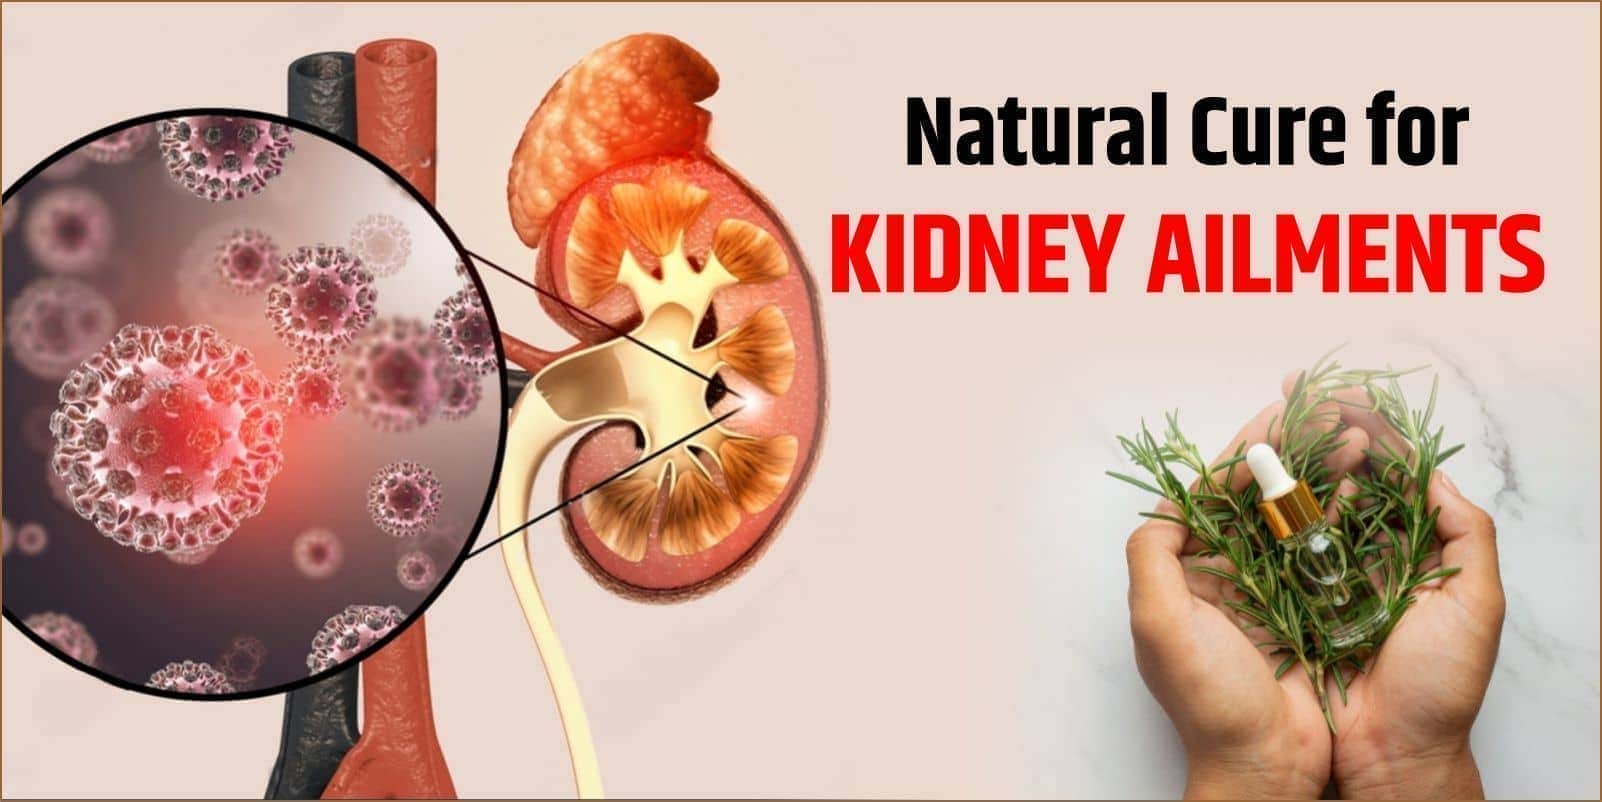 Natural Cure for Kidney Ailments